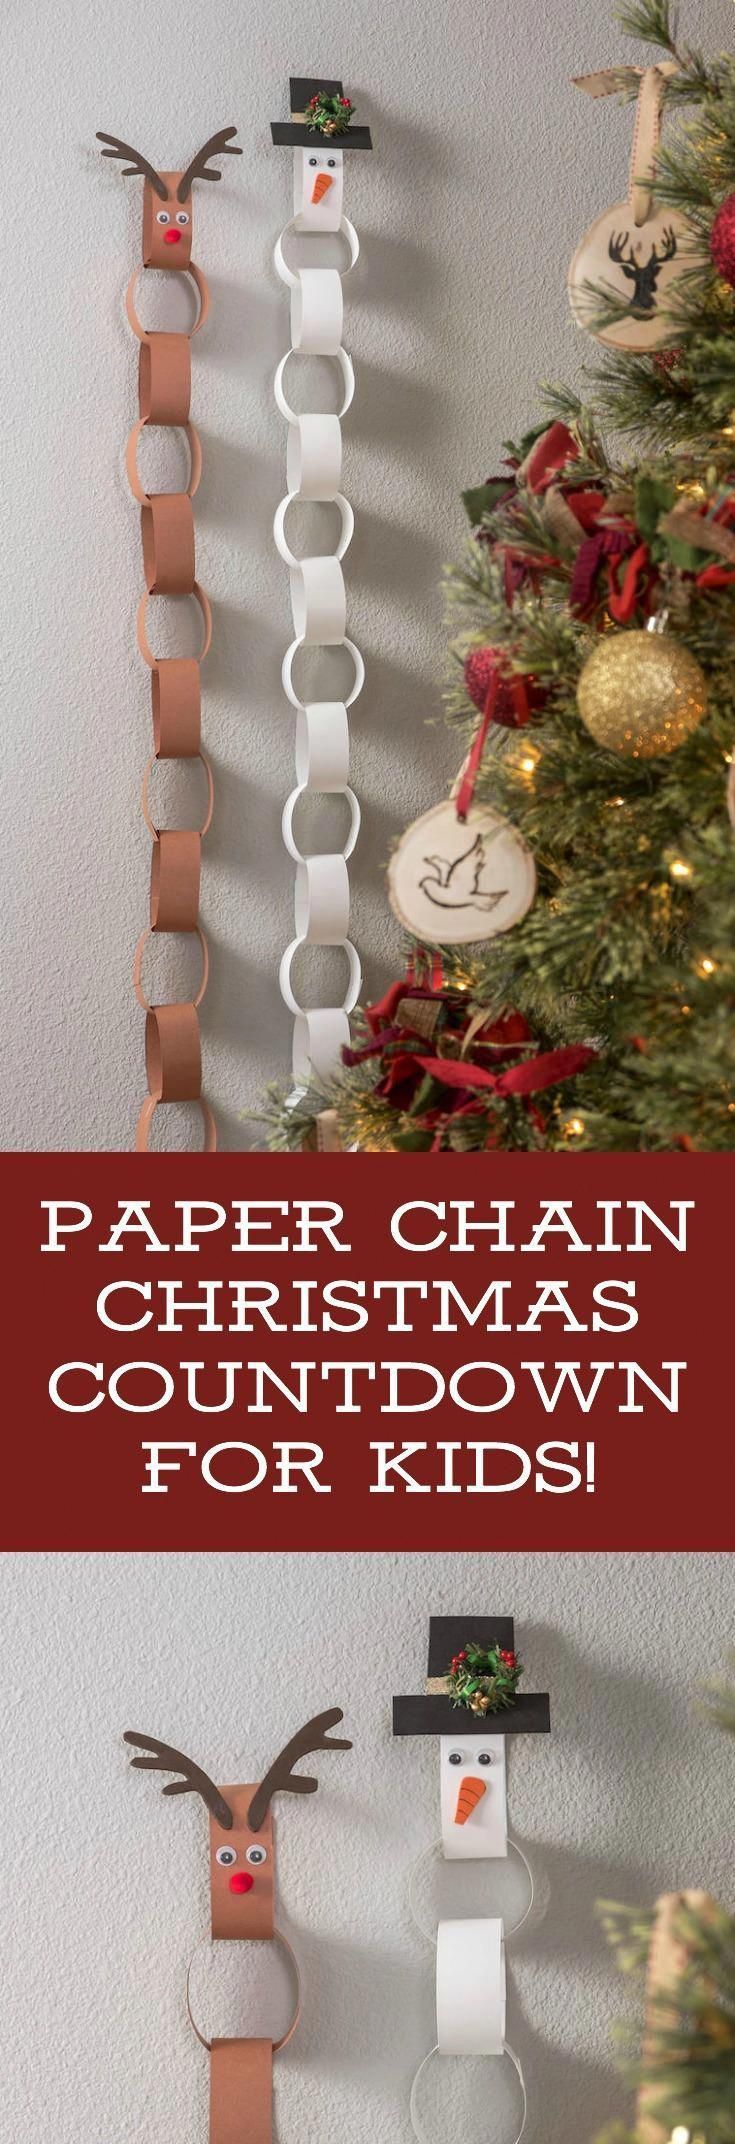 Make an EASY Paper Chain Kids Advent Calendar -   19 diy christmas decorations for kids ideas